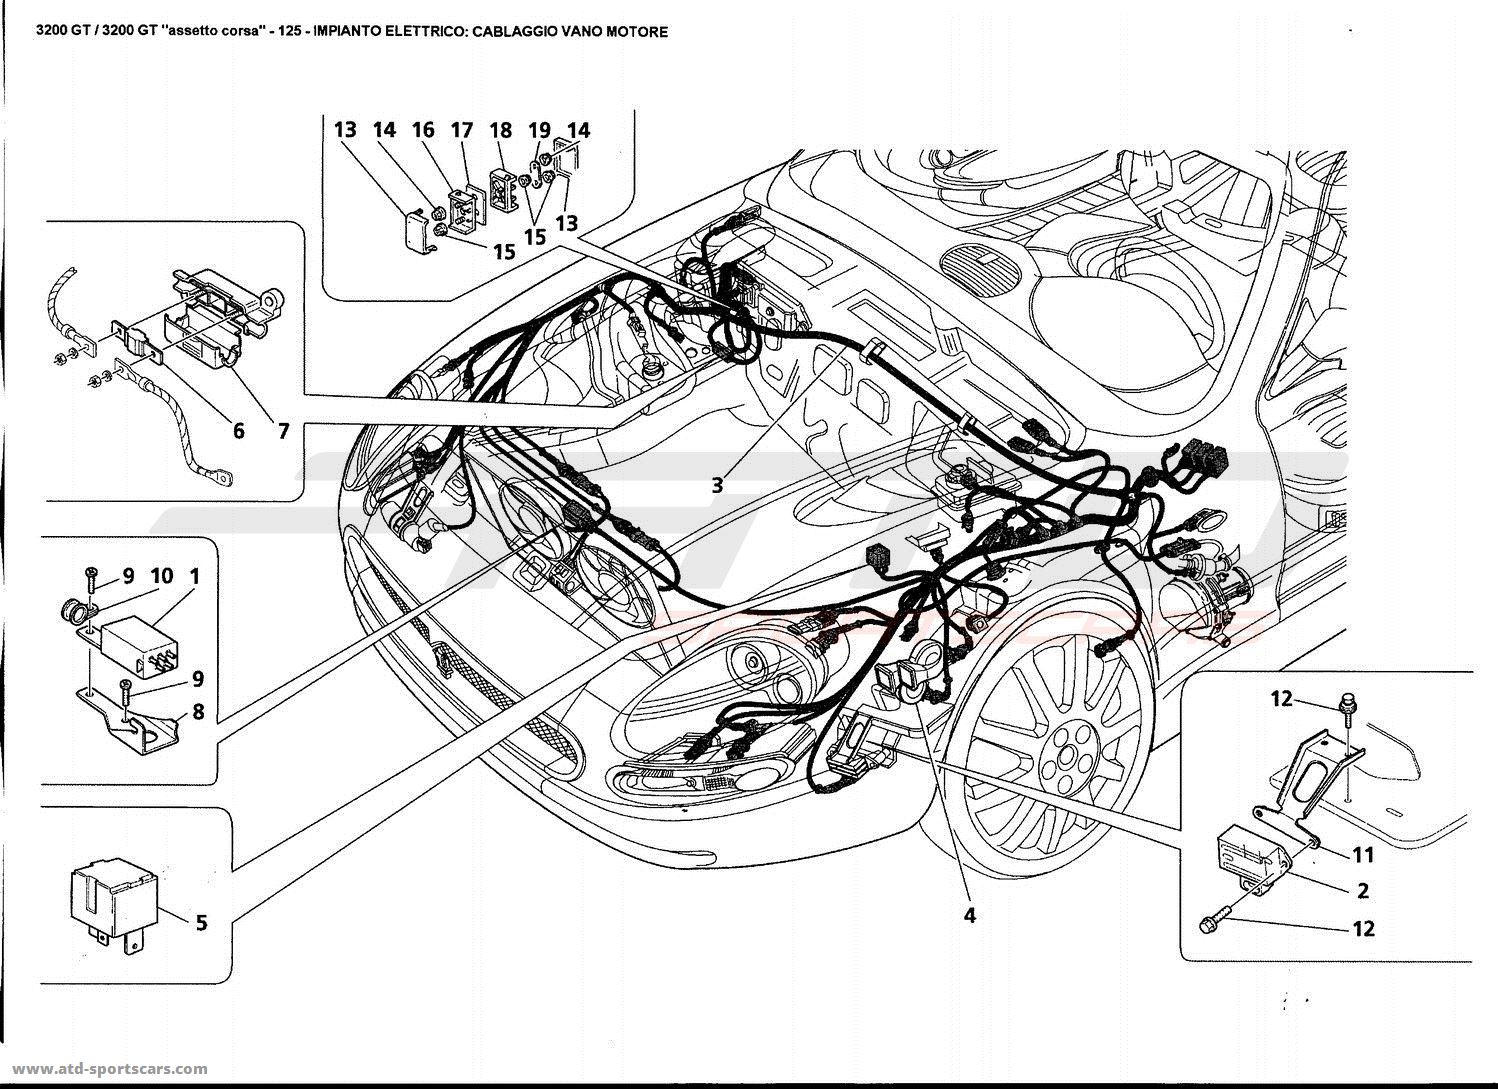 ELECTRICAL SYSTEM: ENGINE COMPARTMENT HARNESS